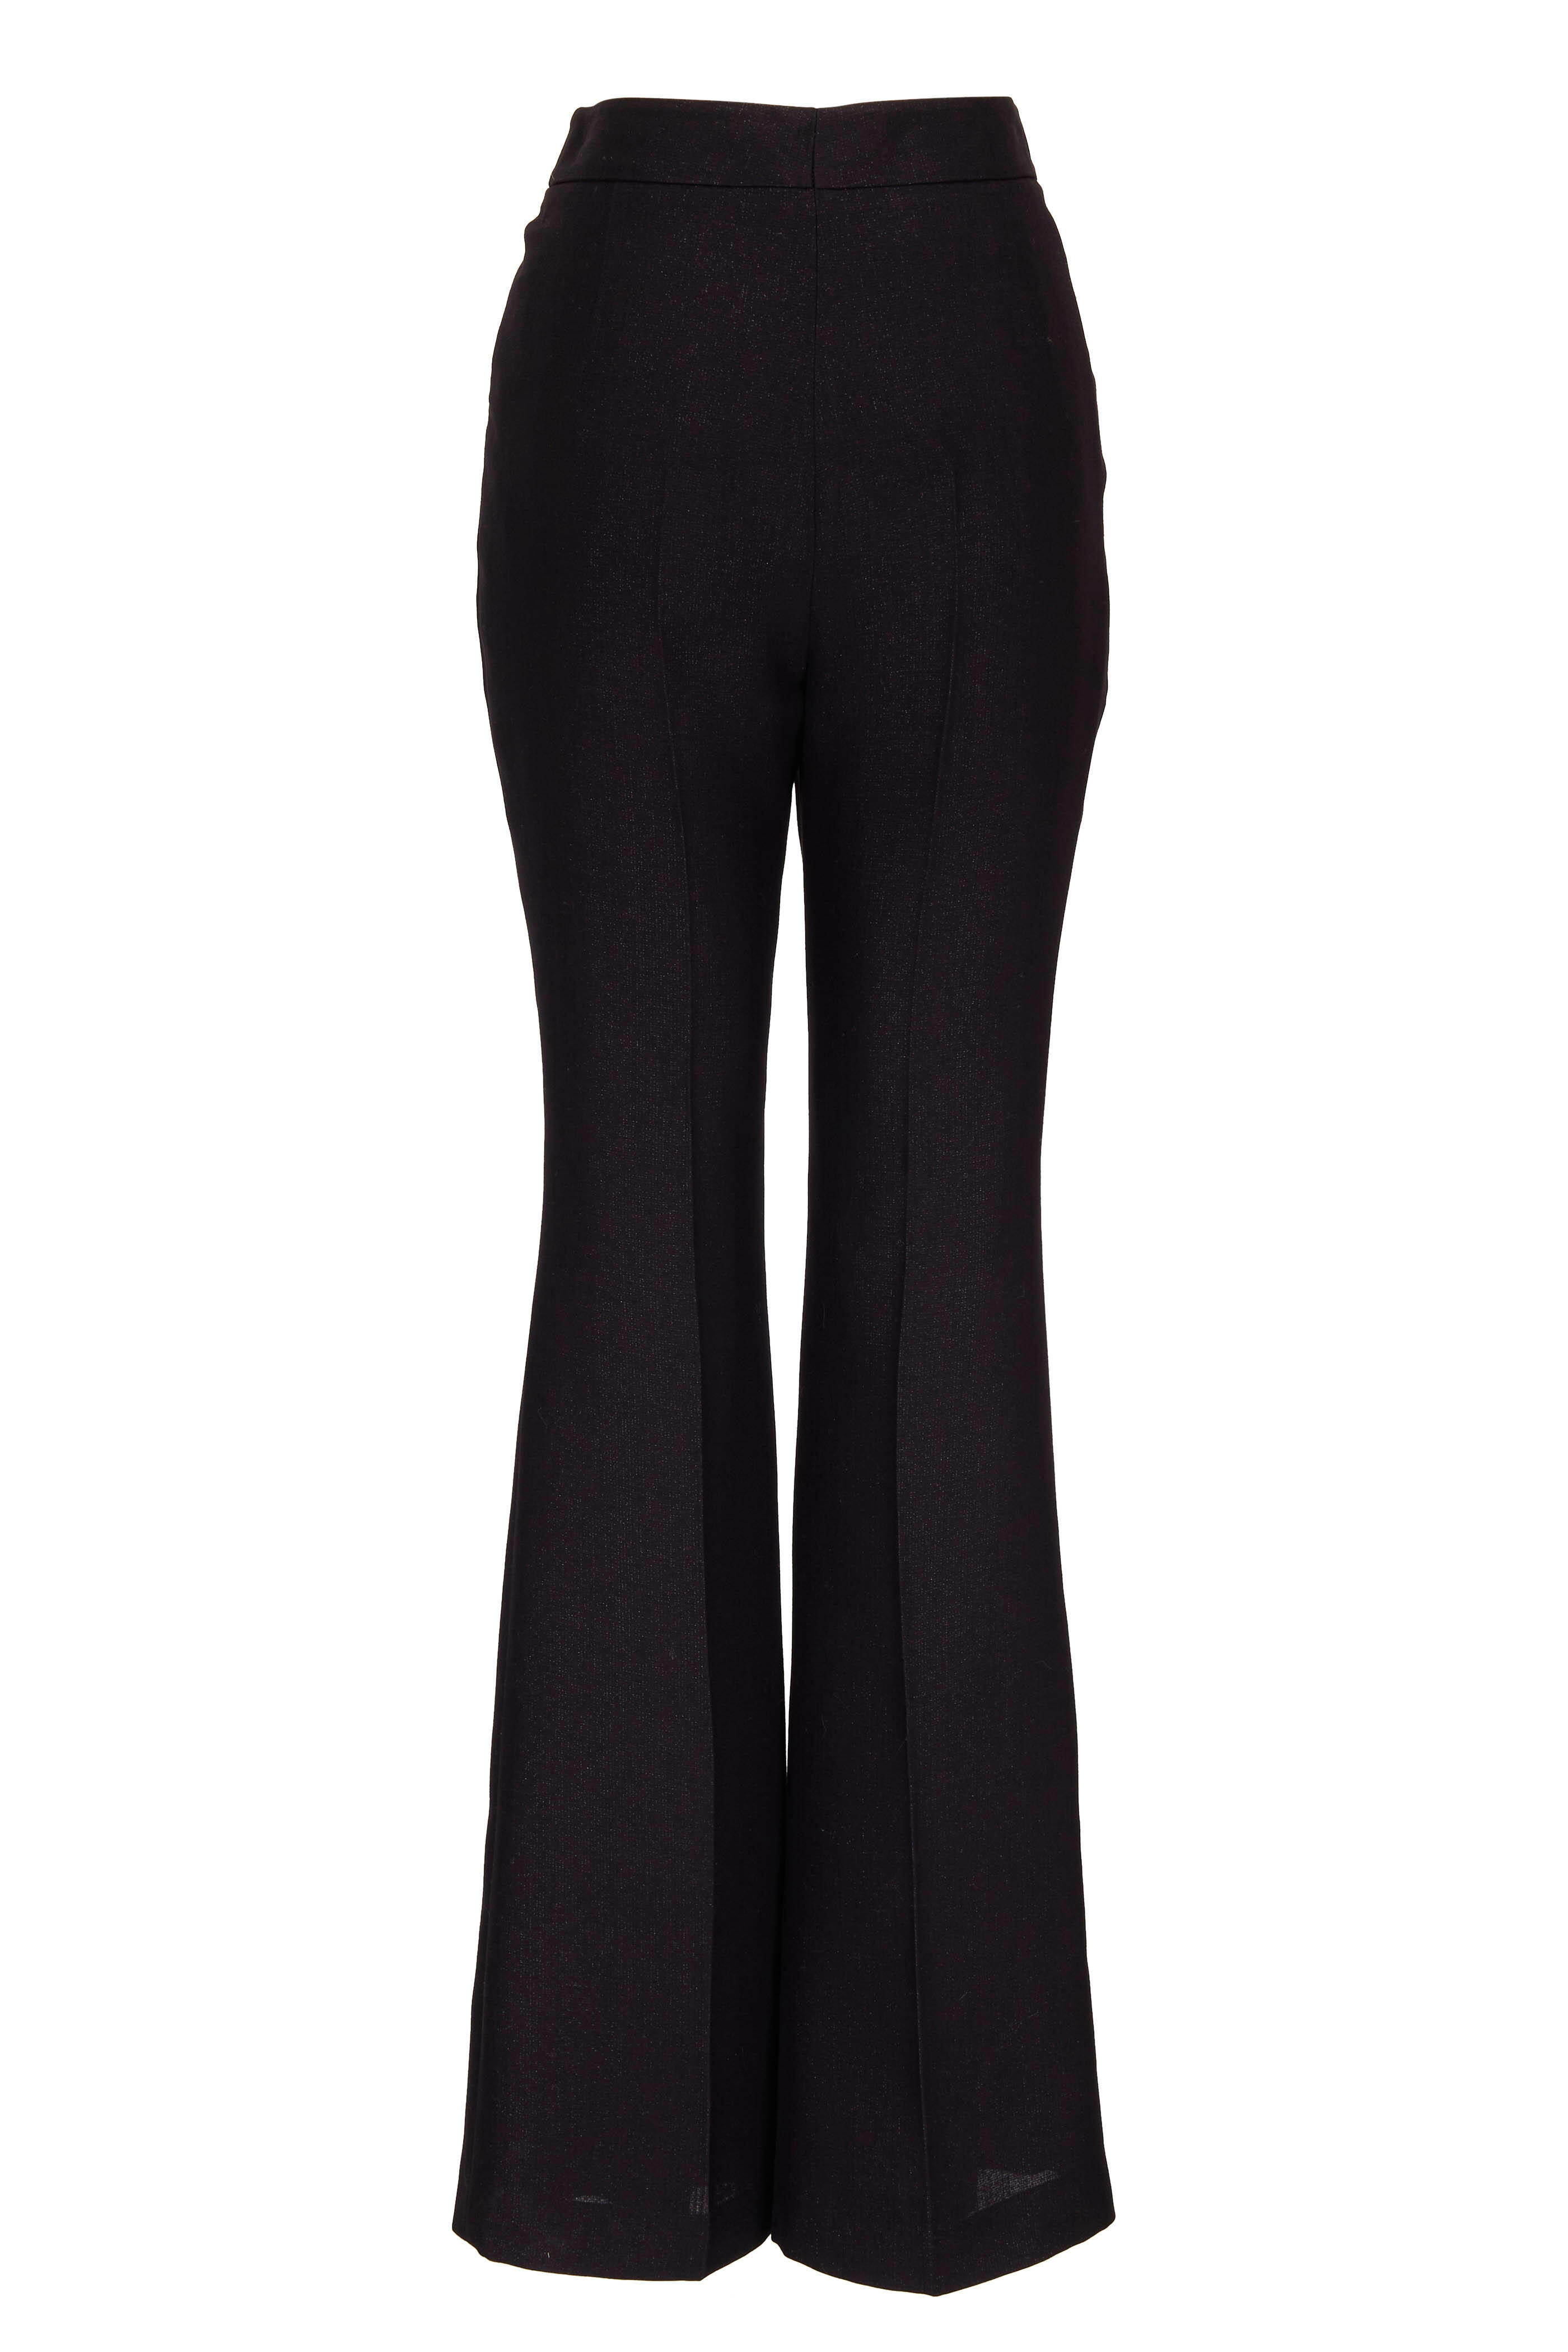 Panthi Fashion Flared Women Black Trousers - Buy Panthi Fashion Flared Women  Black Trousers Online at Best Prices in India